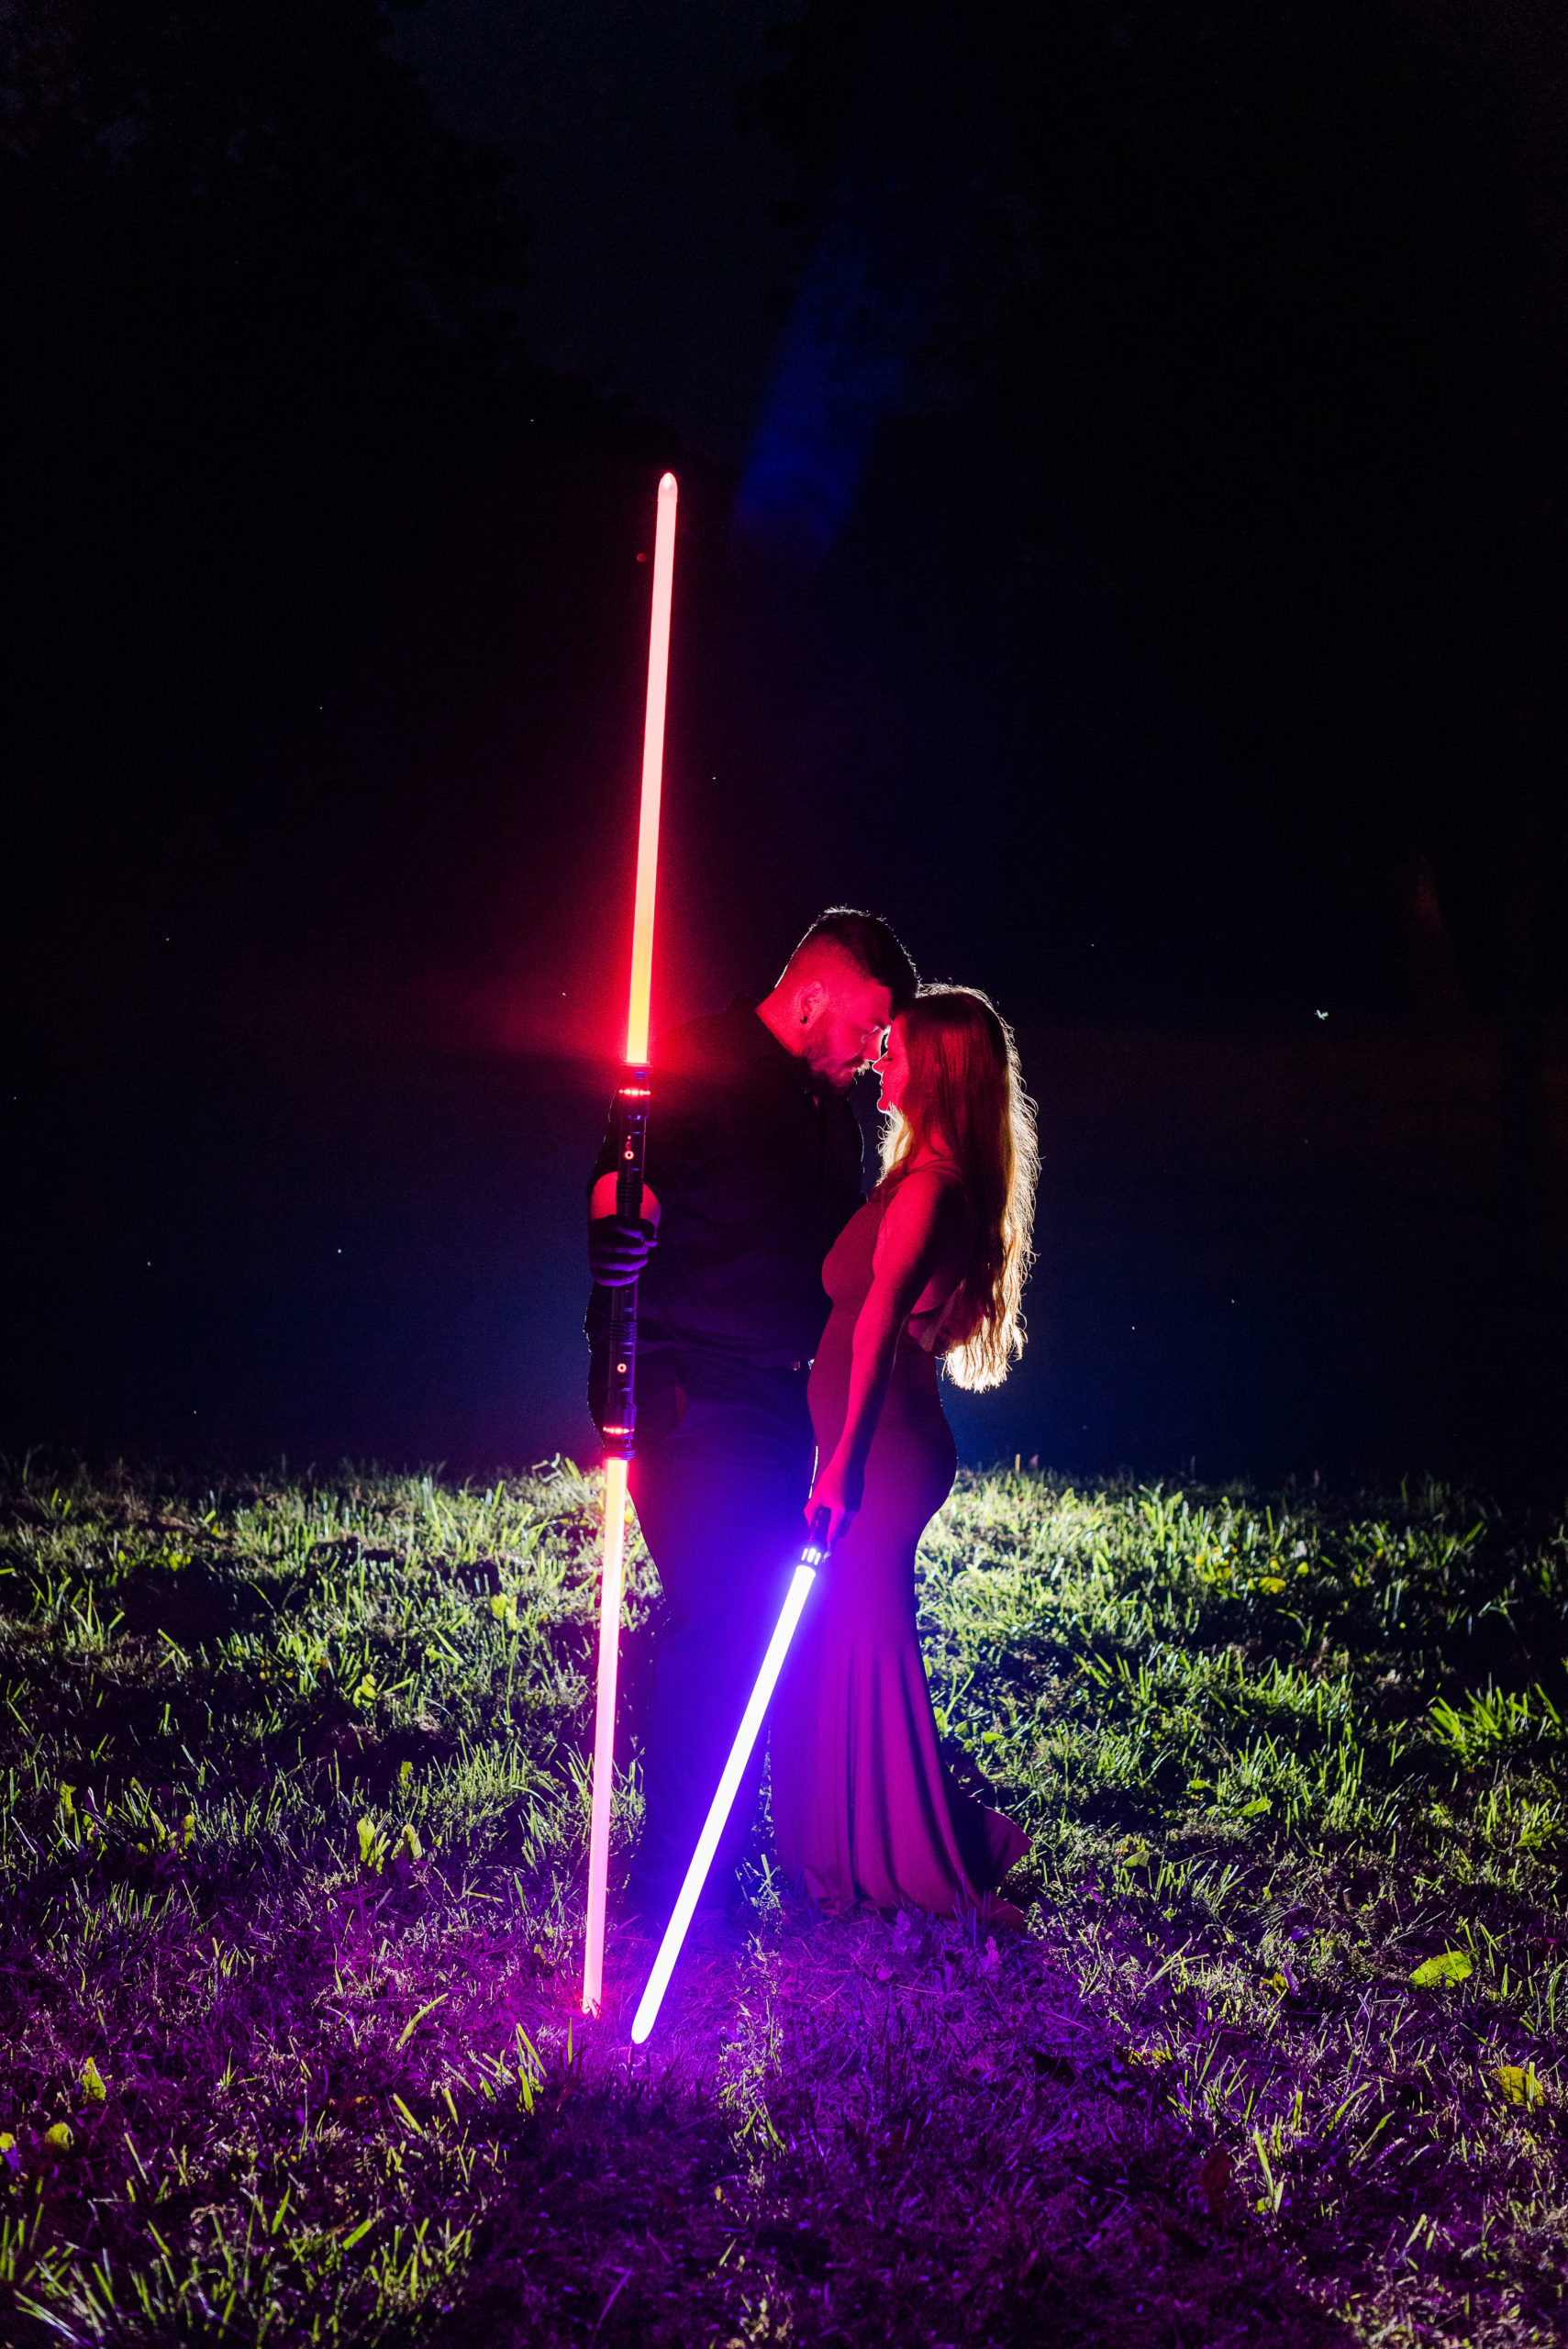 Wendi and Sage's Engagement Session with lightsabers